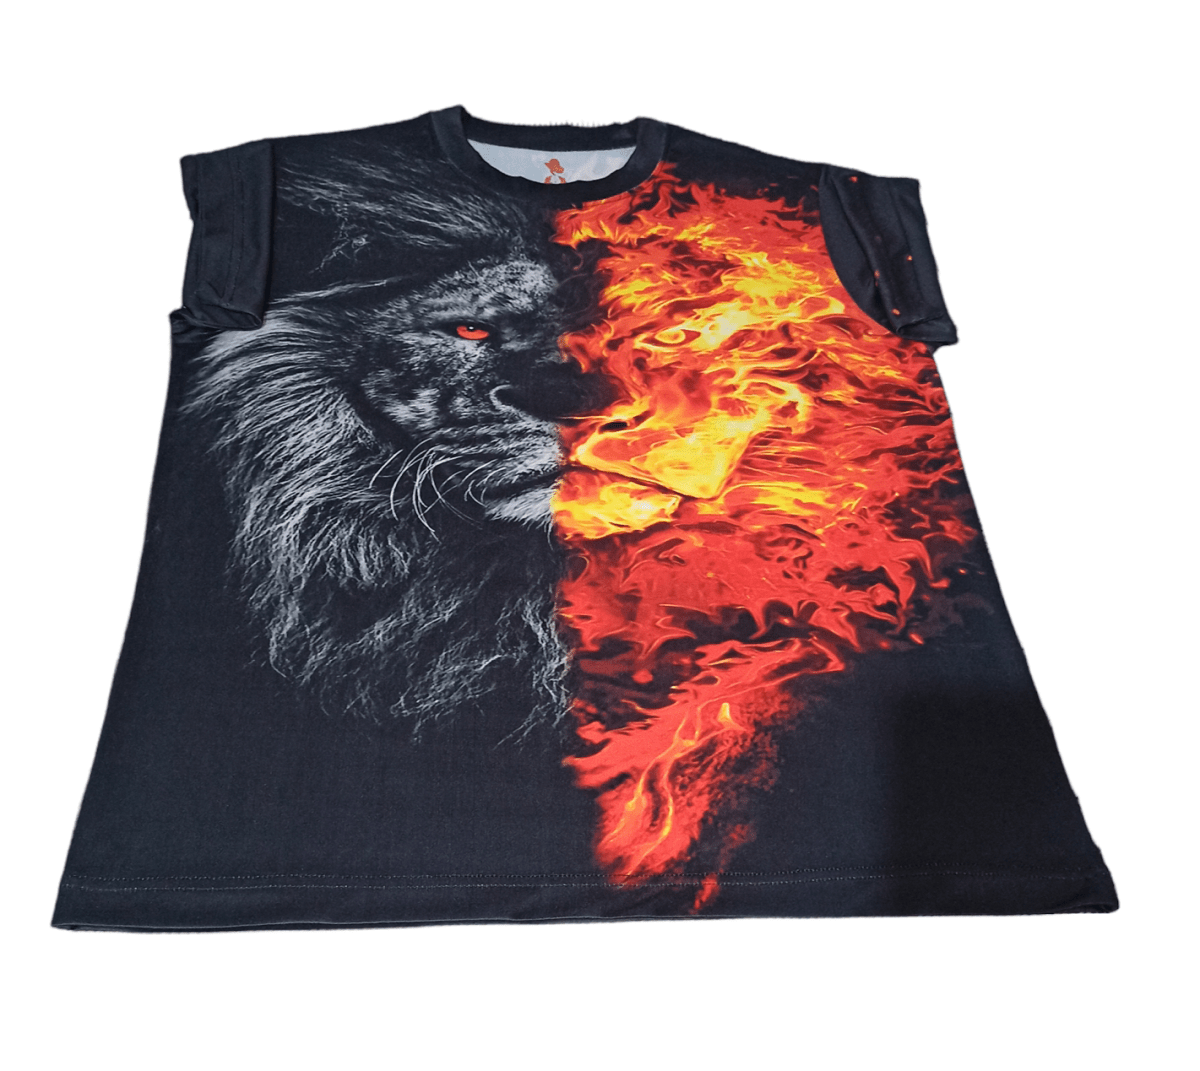 3D Animal Fire Lion Print T shirt - UD FABRIC - Your Style our Design